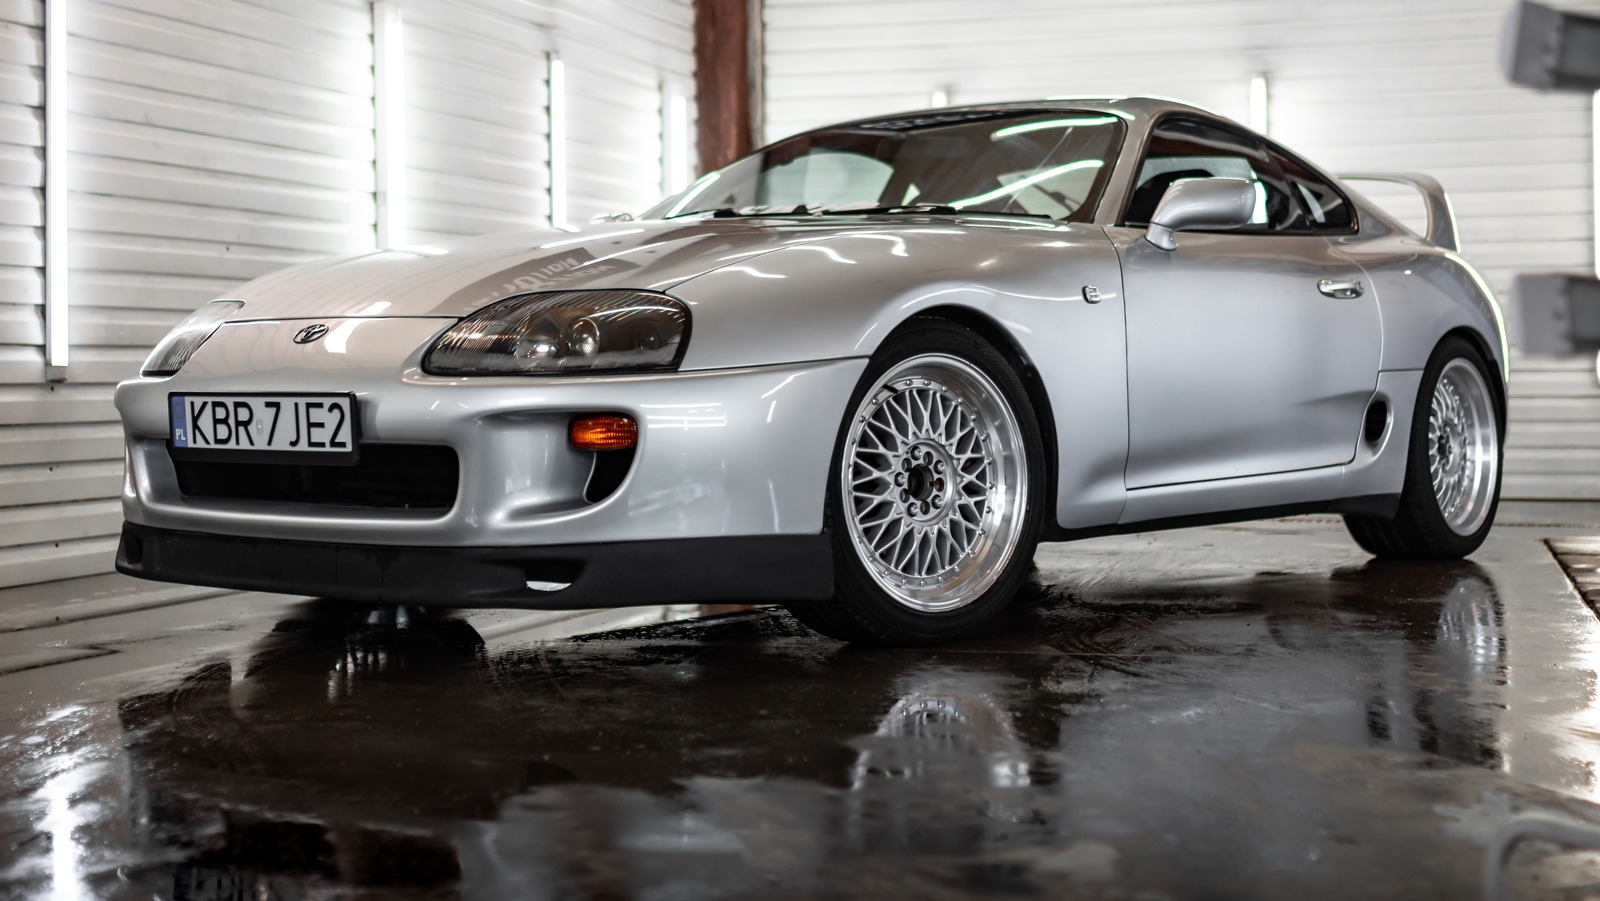 https://www.slashgear.com/img/gallery/12-facts-about-the-toyota-supra-mk4-only-hardcore-car-fans-know/l-intro-1678728053.jpg